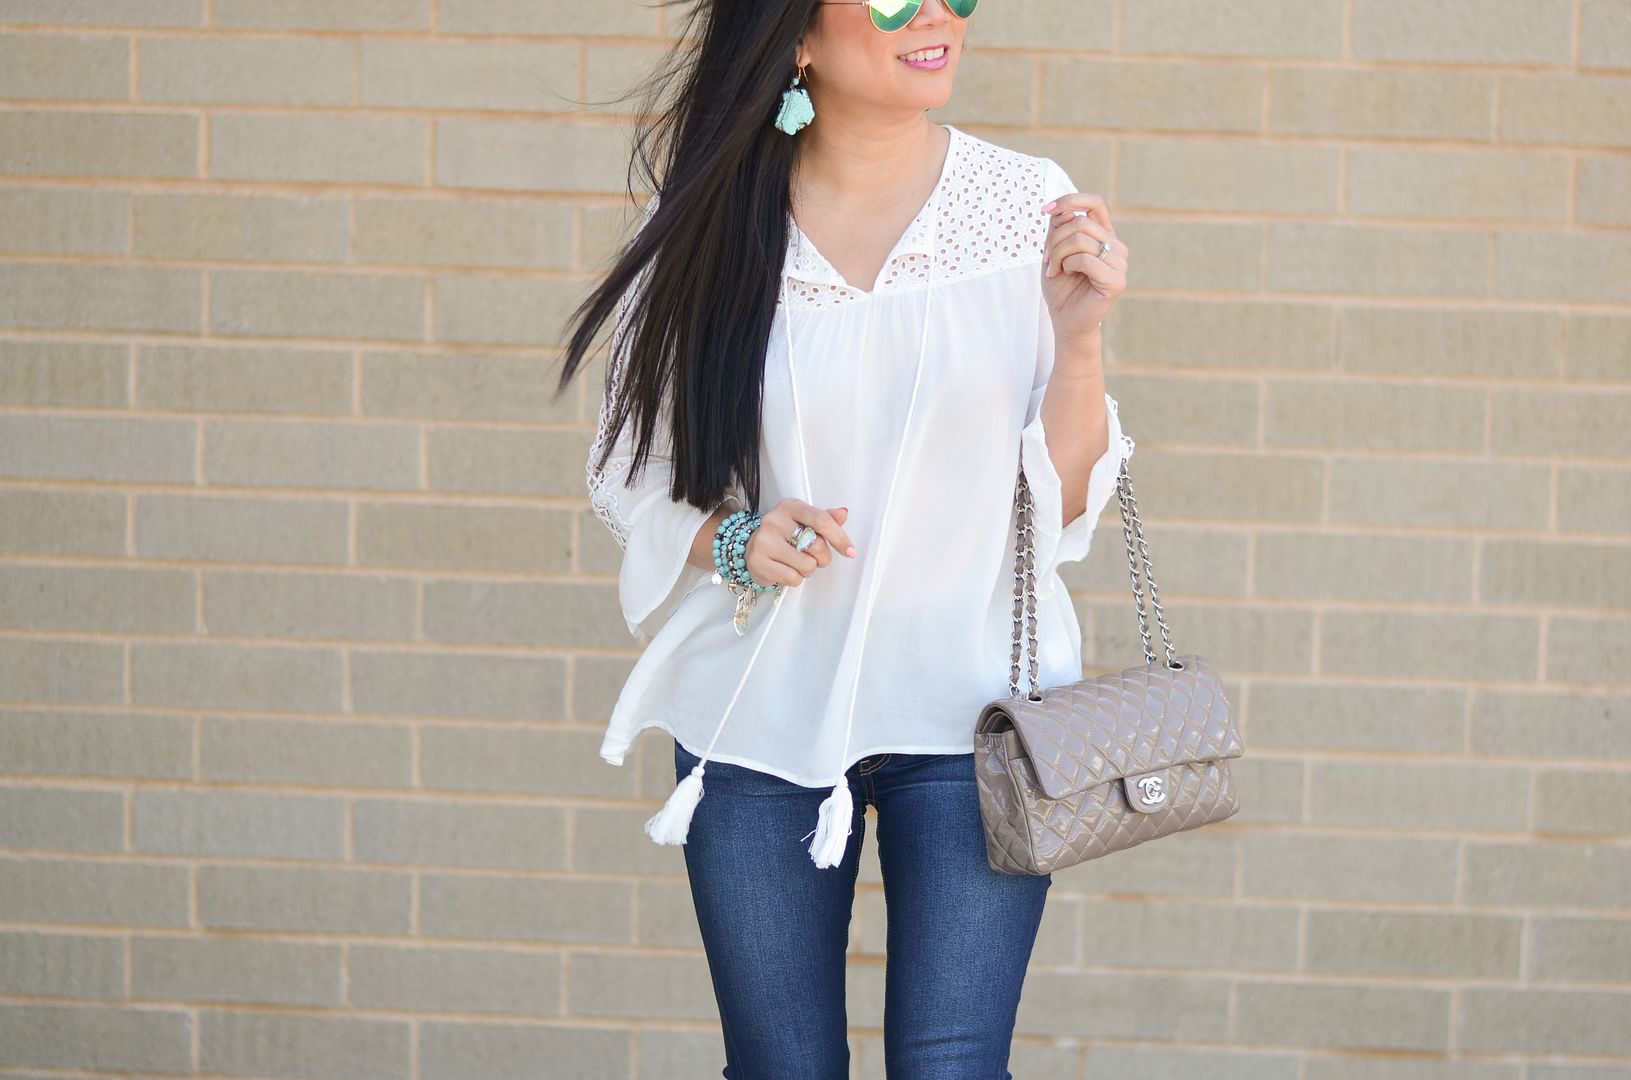 White and turquoise outfit